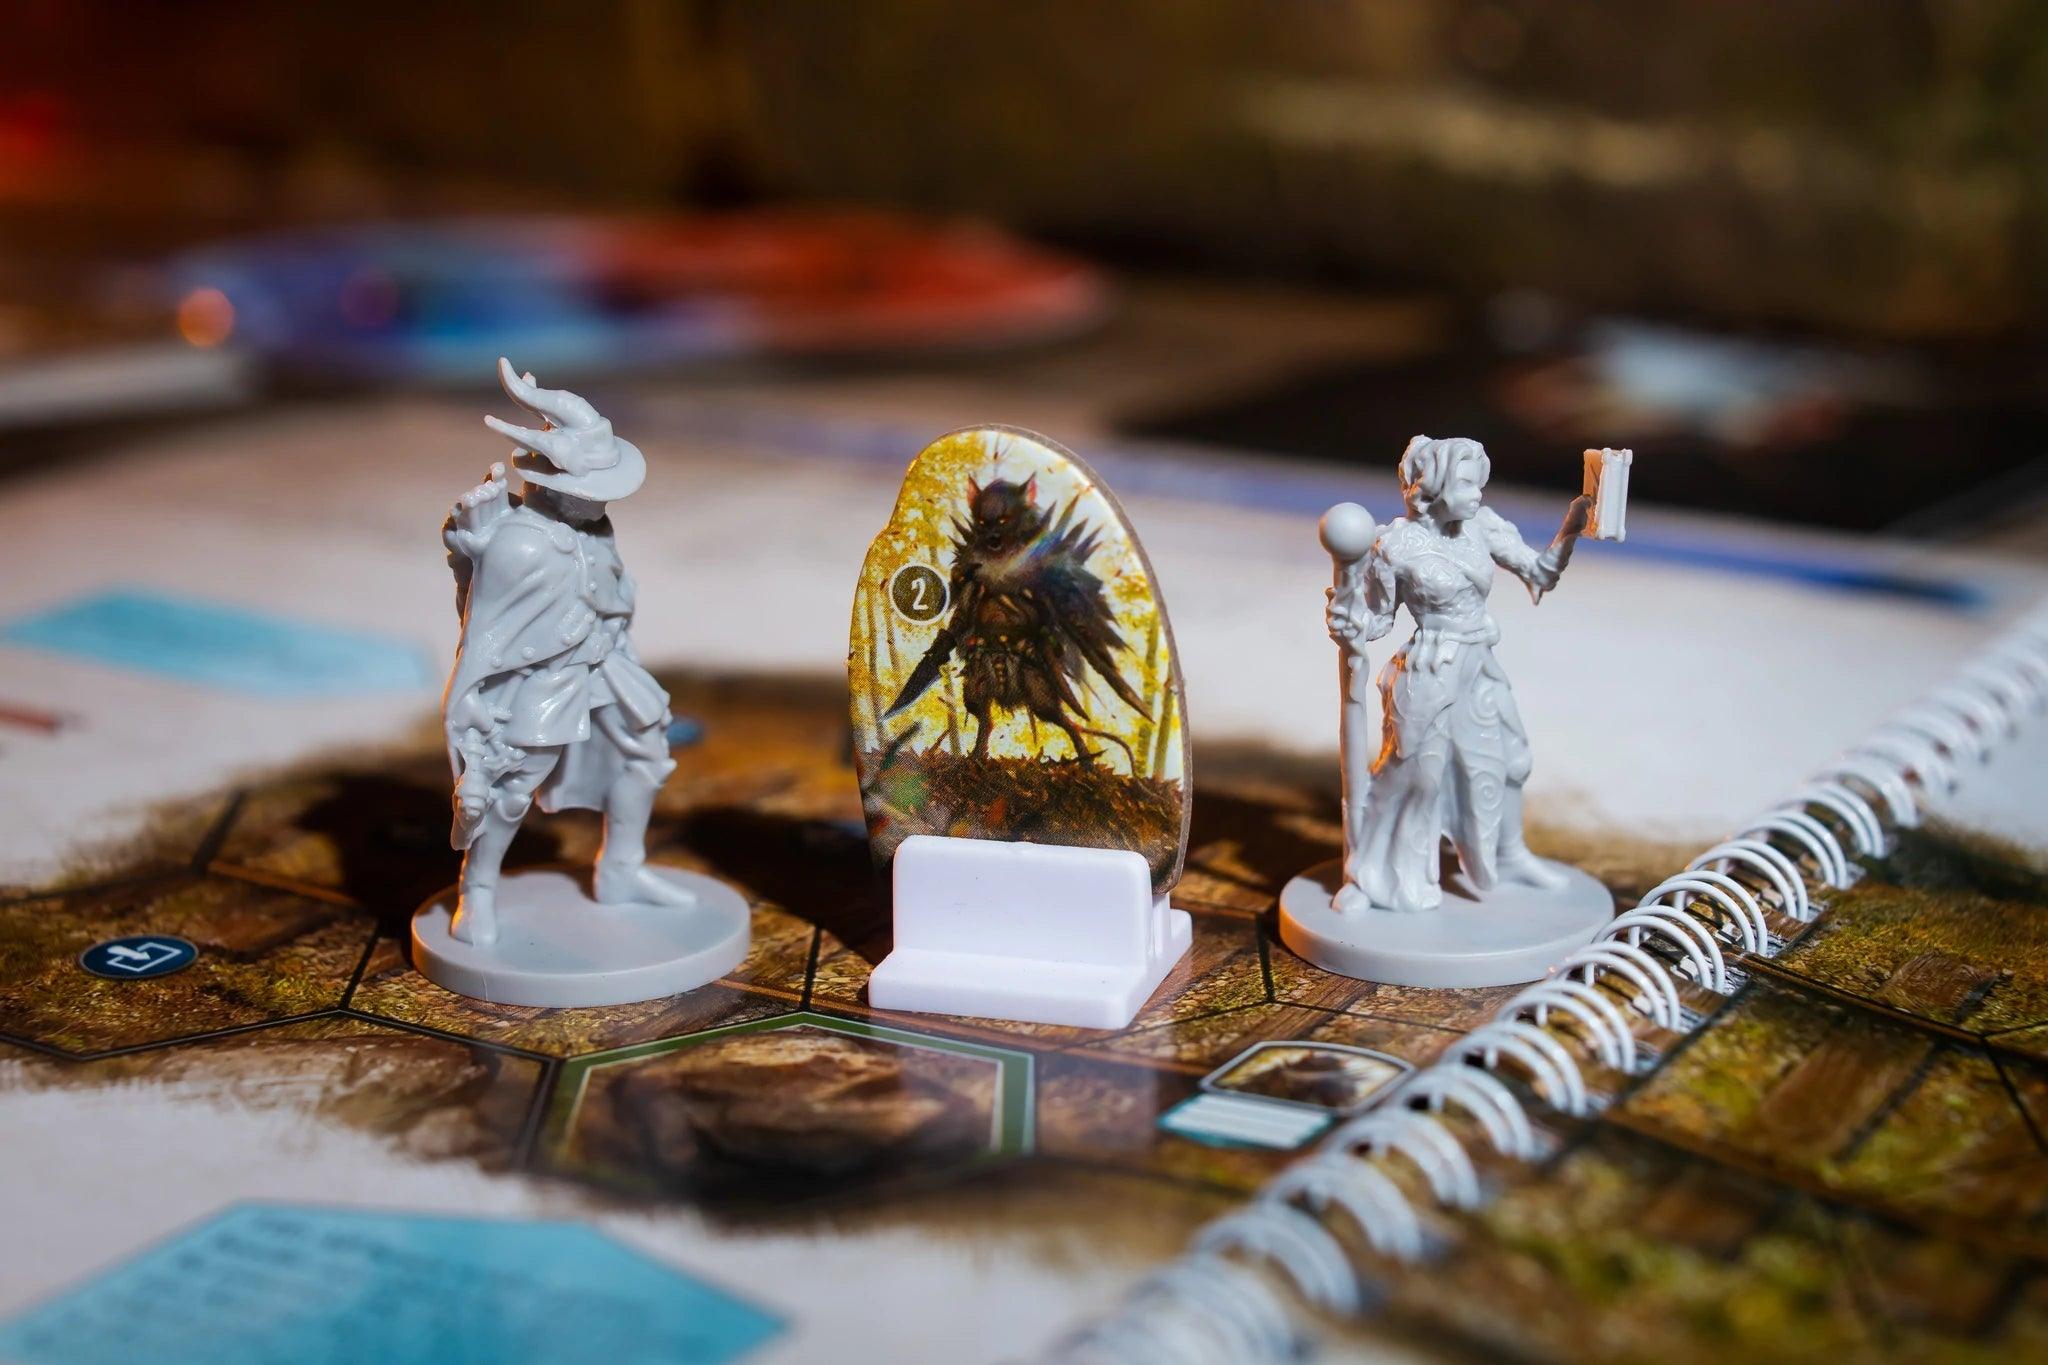 Gloomhaven: Jaws of the Lion - Gaming Library